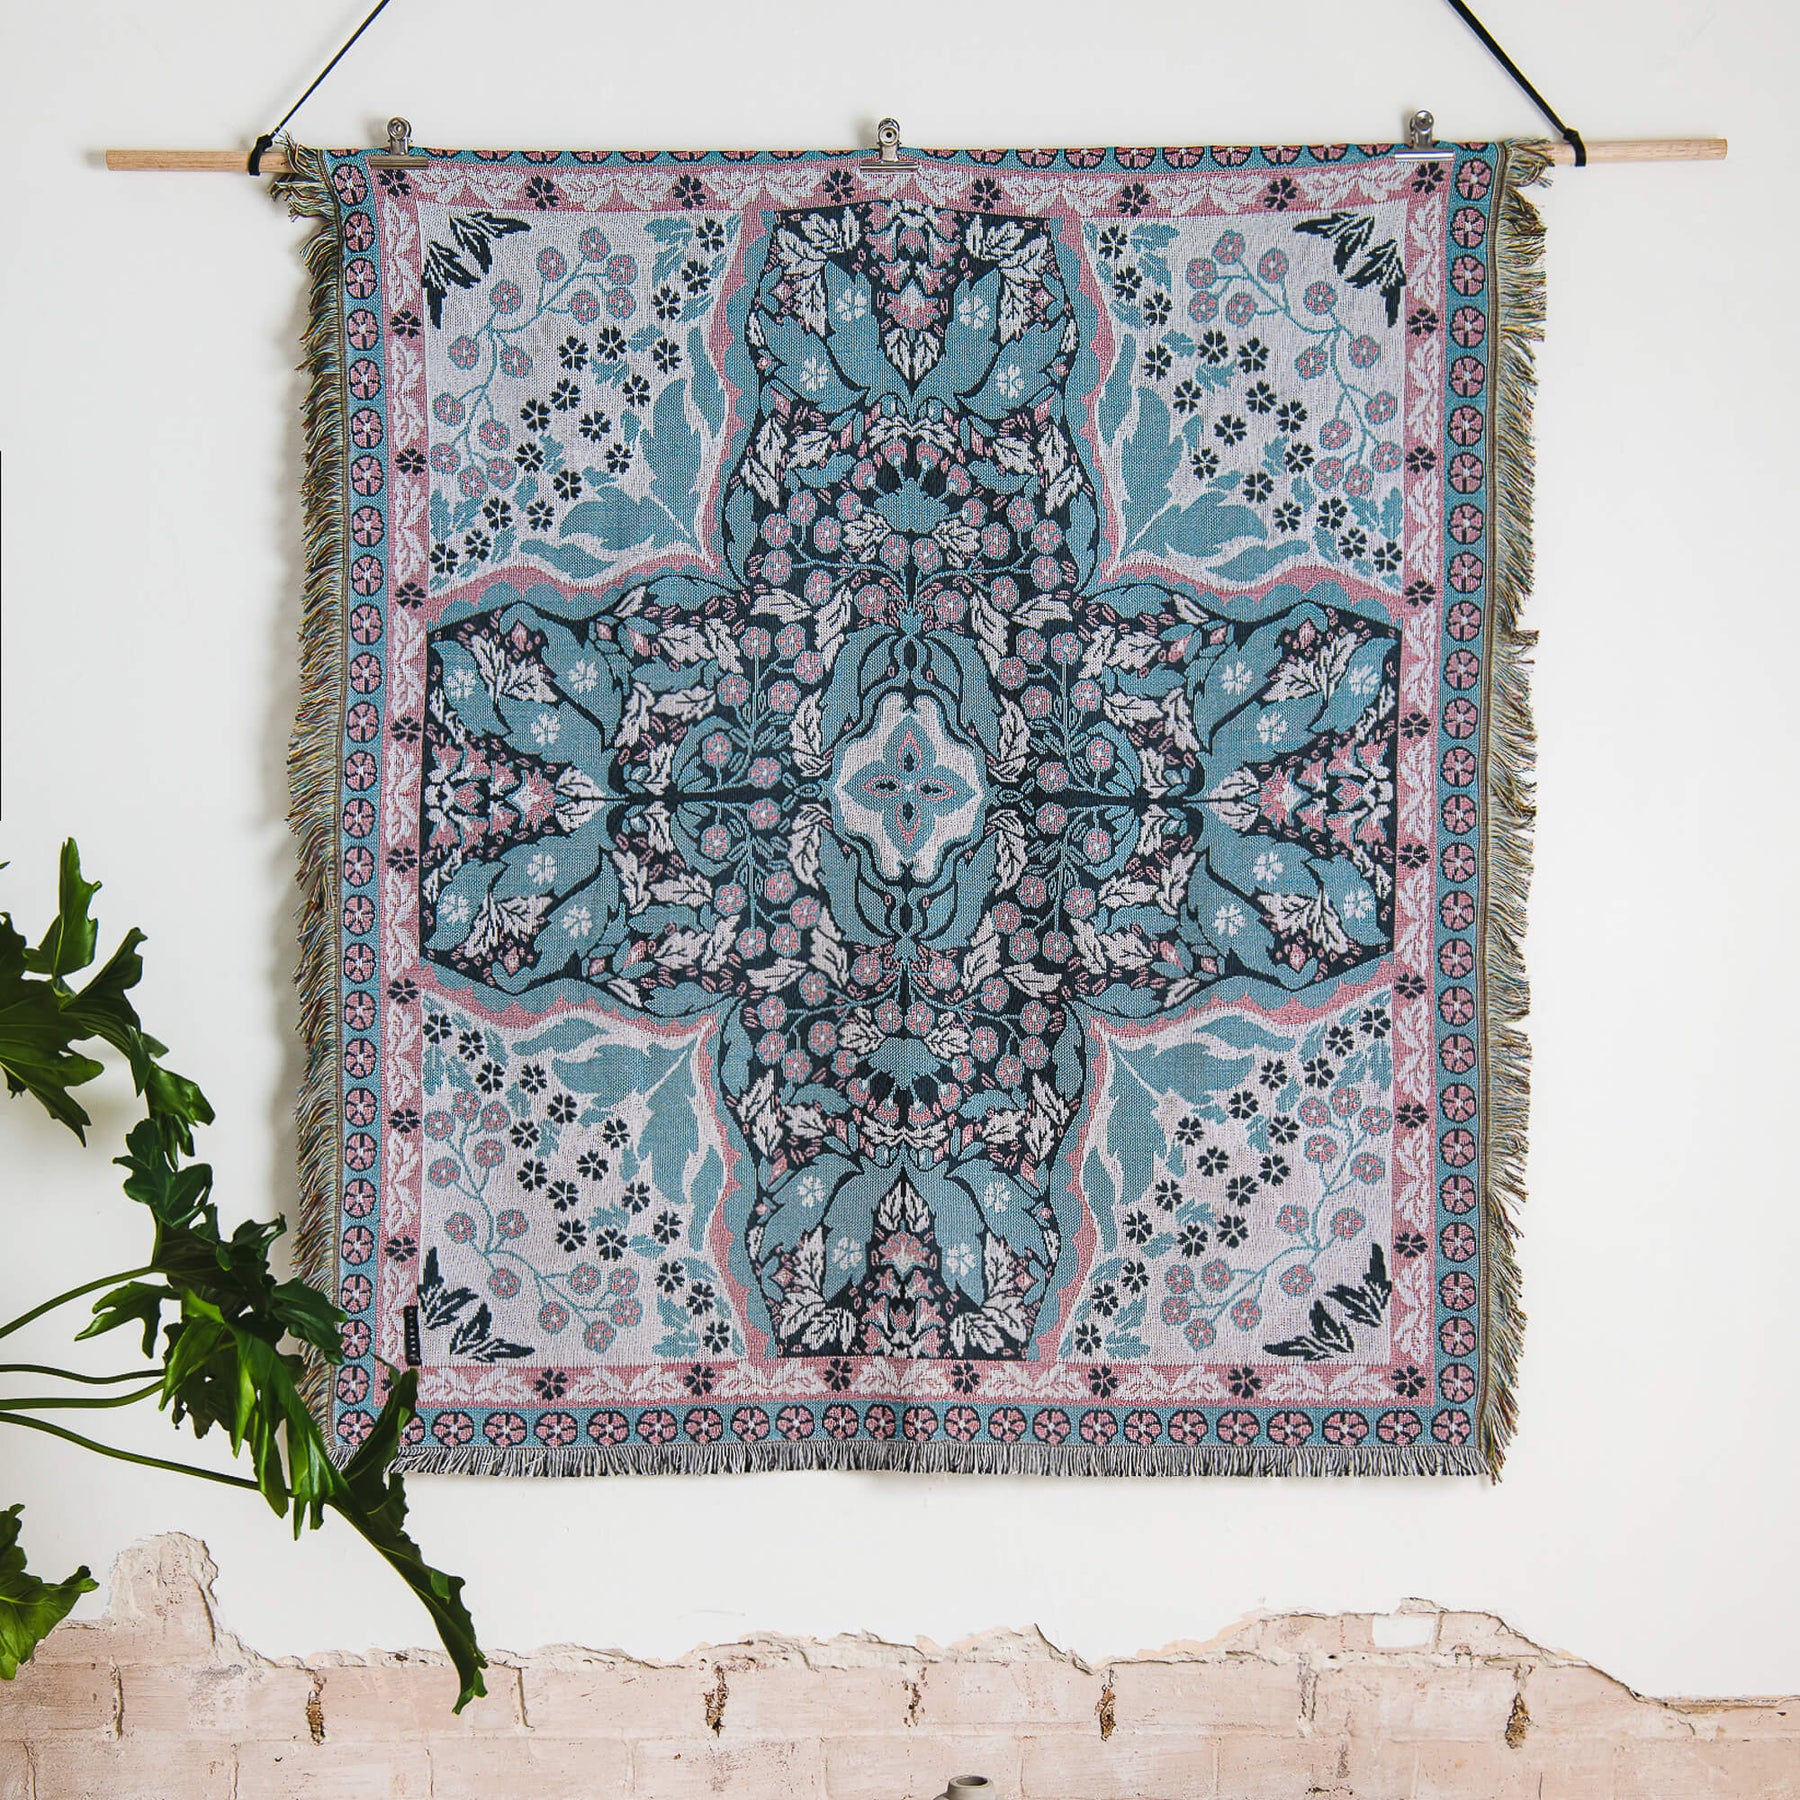 Buy Stylish & Unique Boho Picnic Rugs and Accessories Online | Hendeer